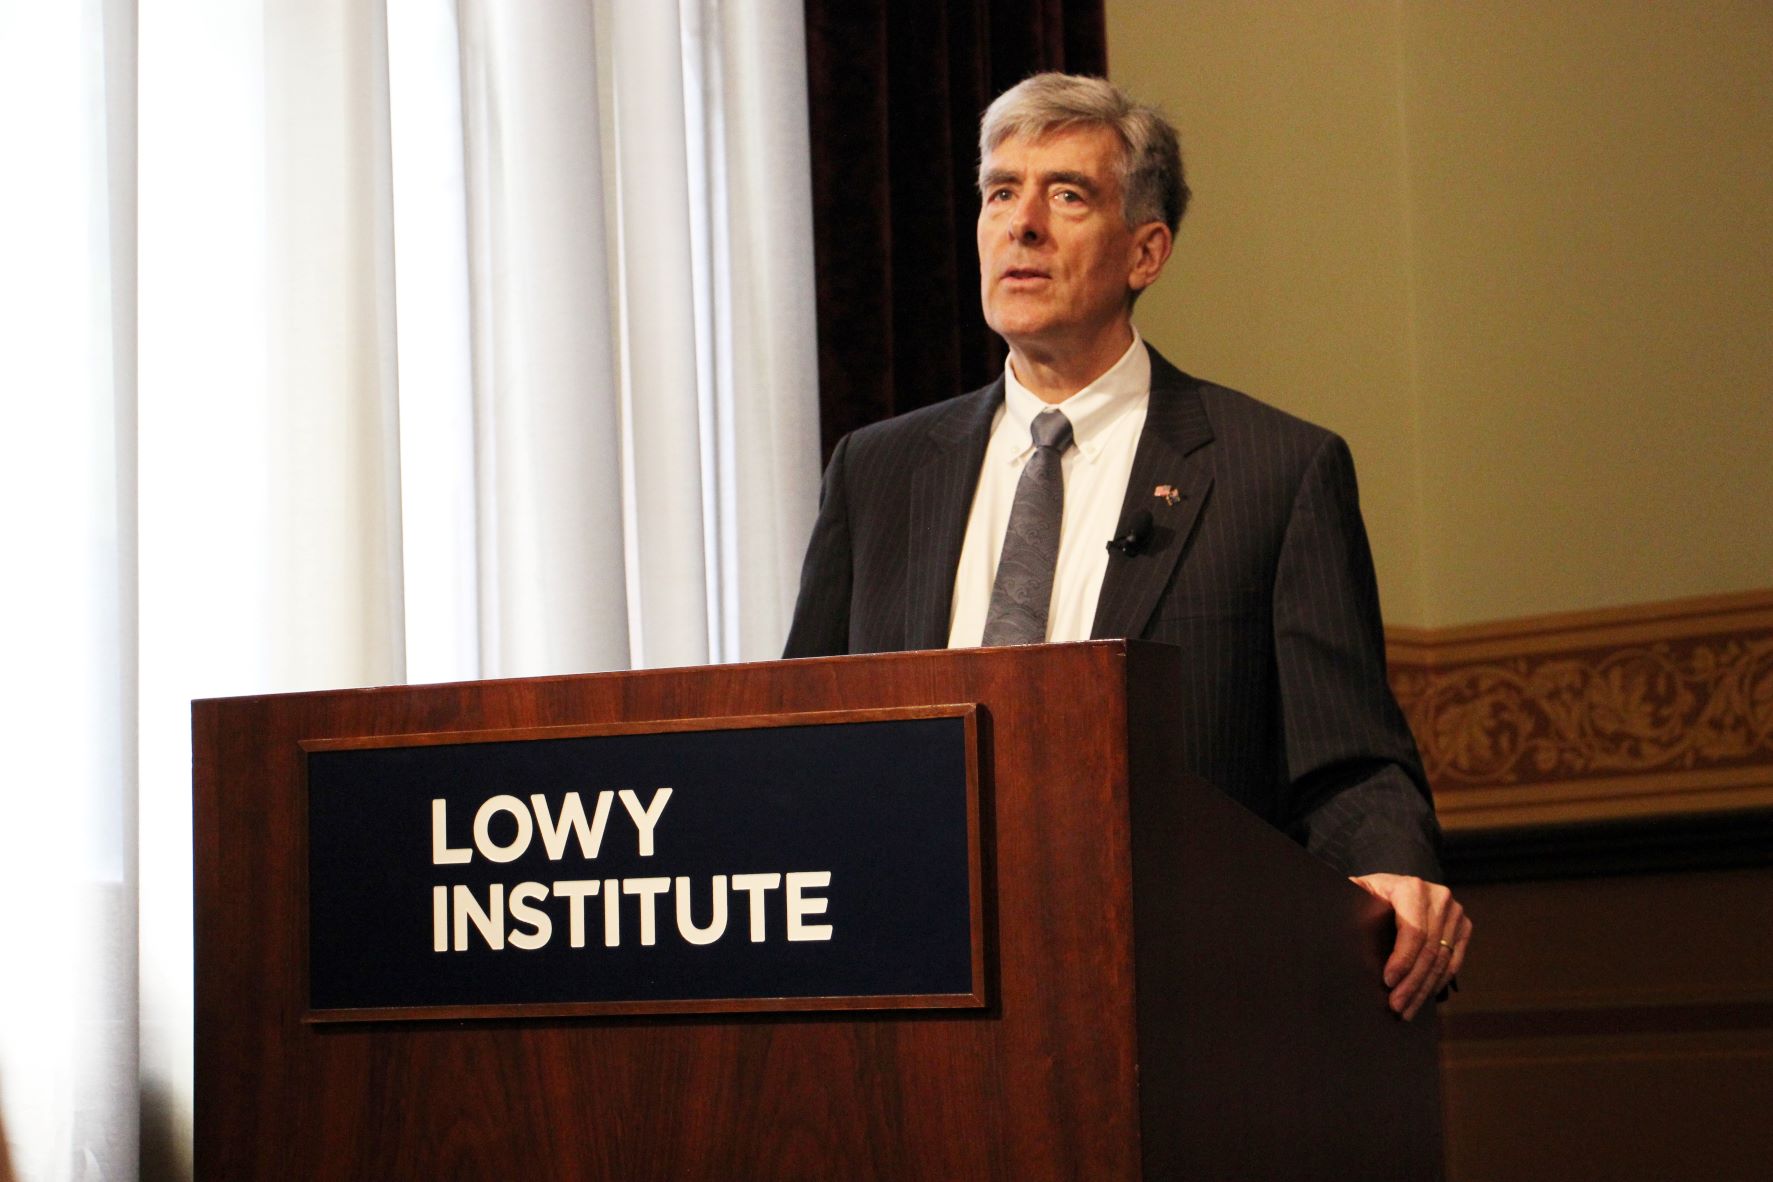 US Cyber Director Chris Inglis speaks at the Lowy Institute on 11 May 2022